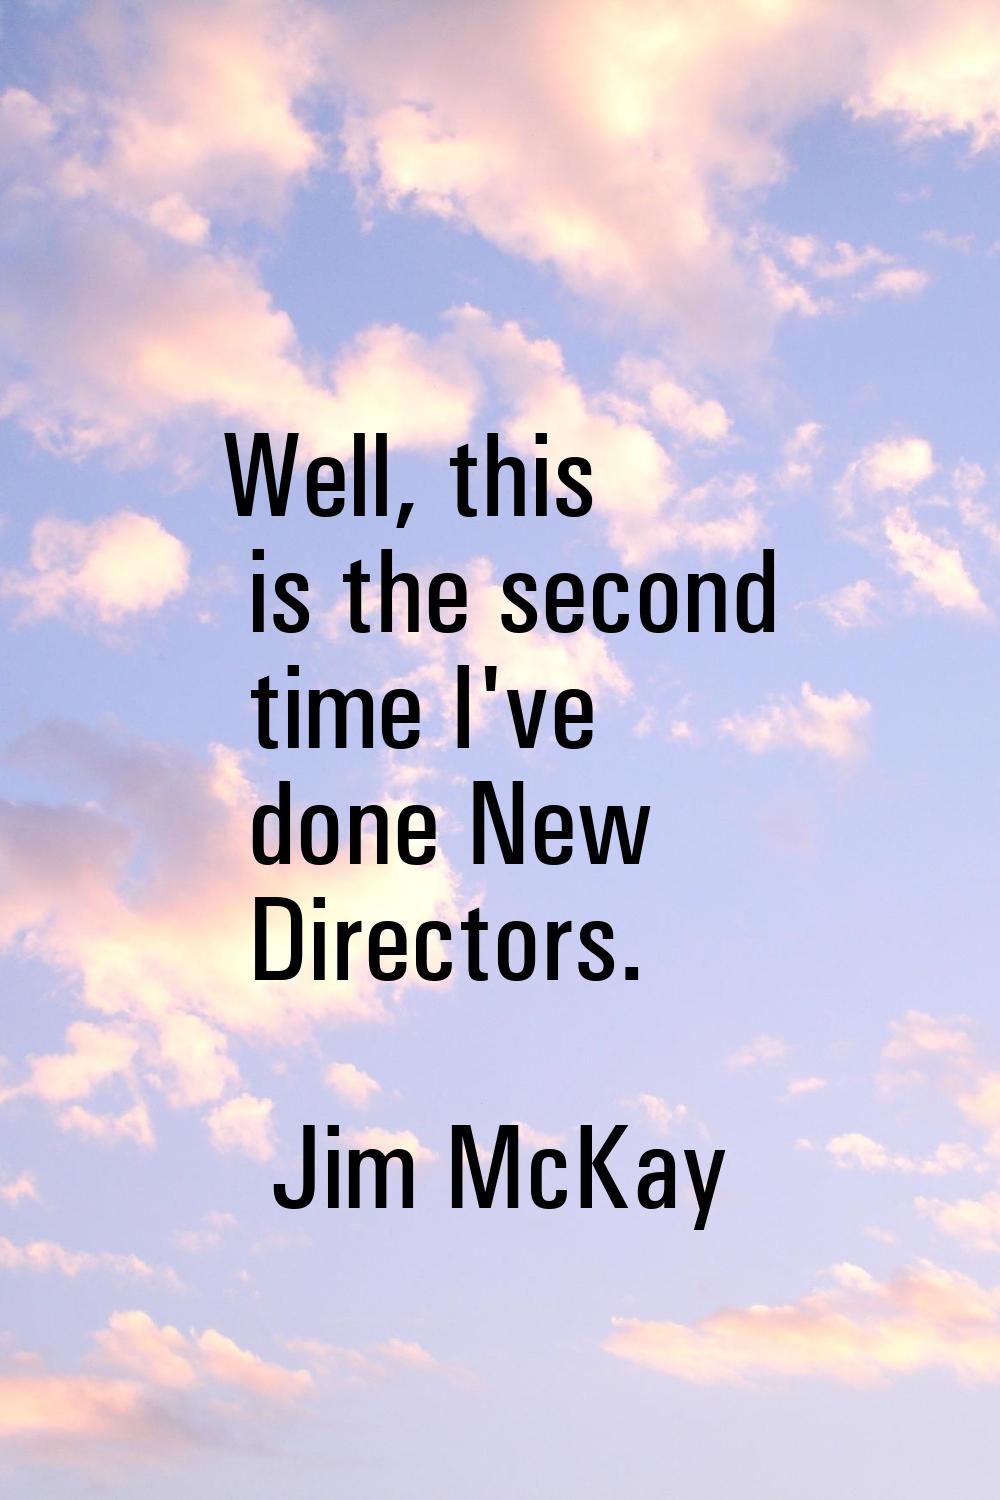 Well, this is the second time I've done New Directors.